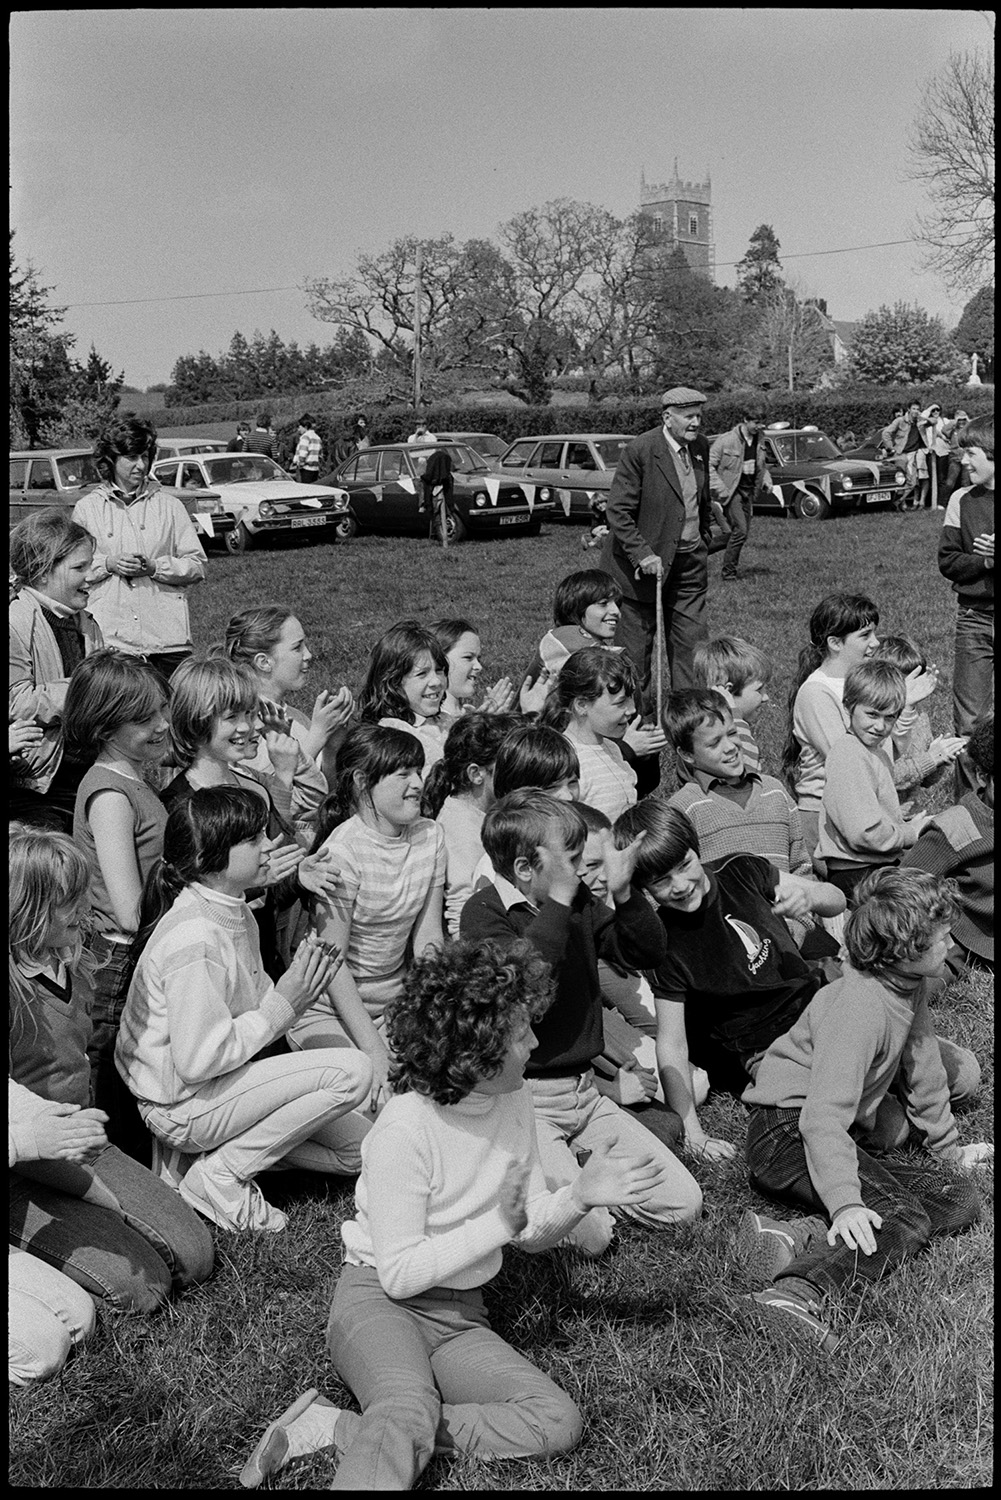 Club Day, sports, sack race, wellie throwing, man filming.
[A crowd of children and adults gathered in a field watching the sports at Iddesleigh Club Day. Parked cars and Iddesleigh Church tower can be seen in the background.]